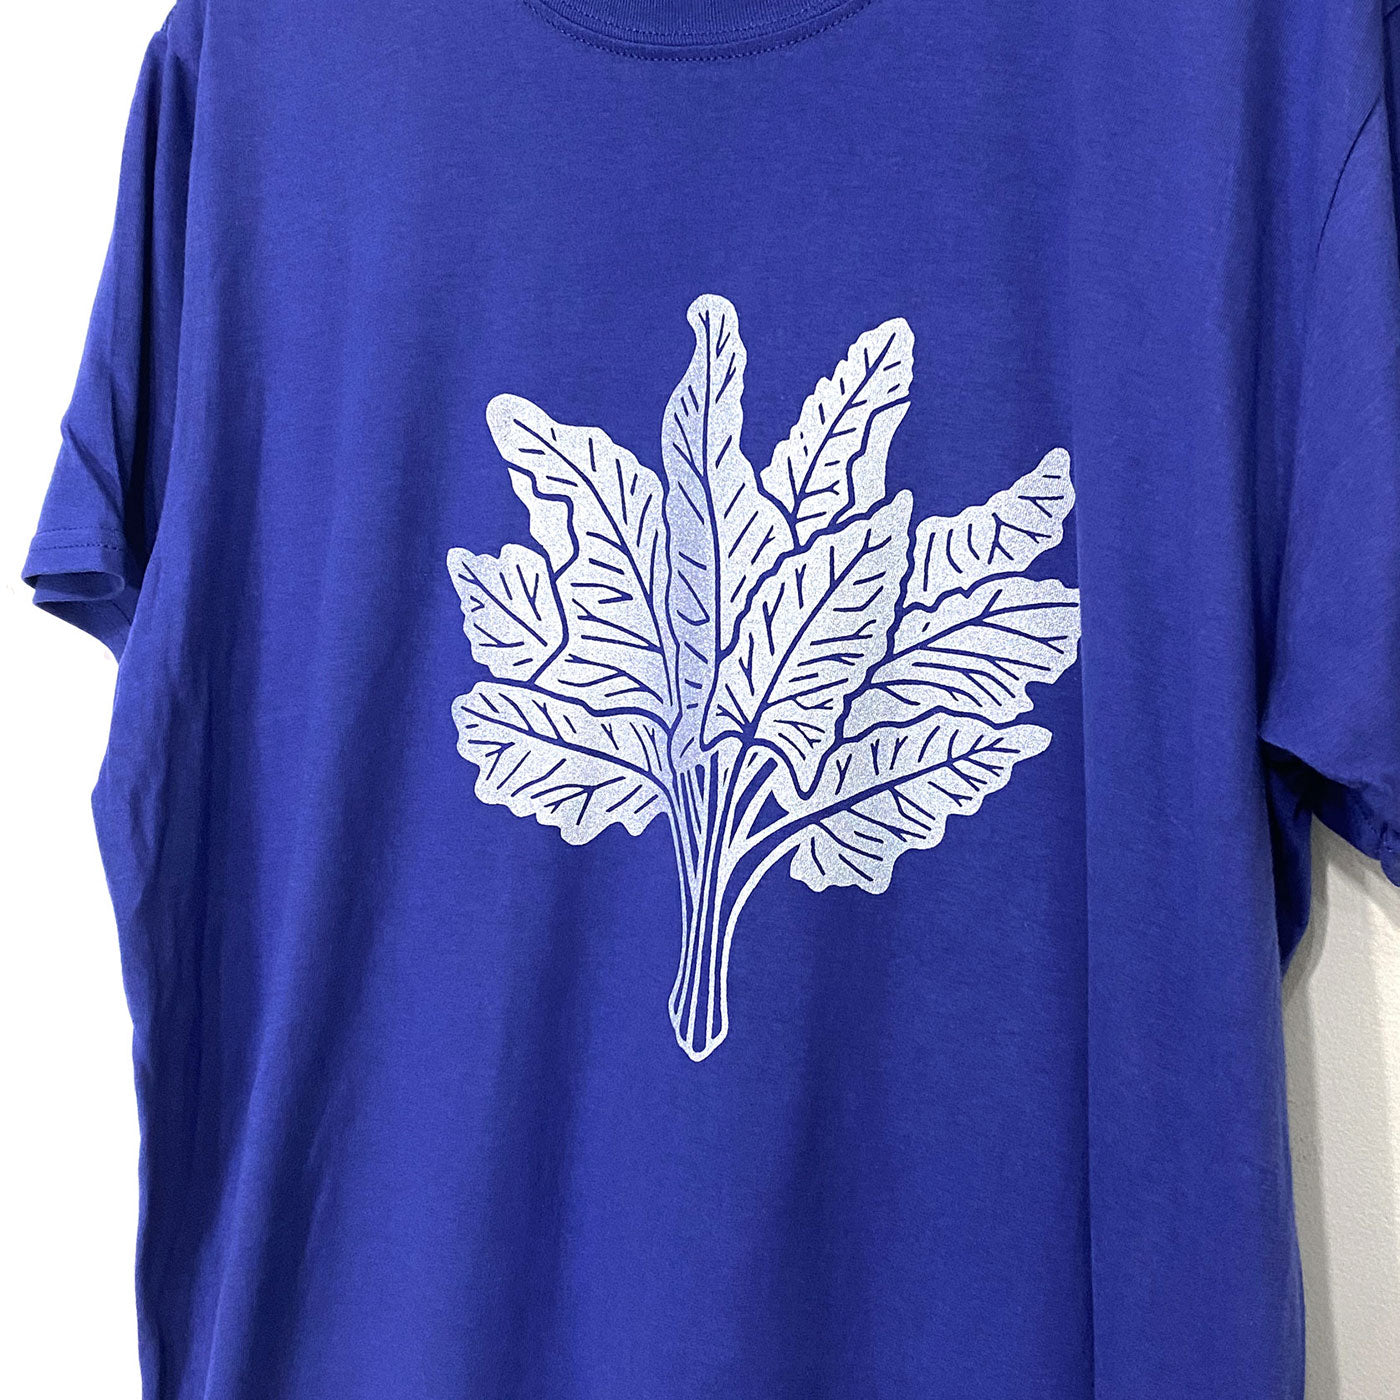 Detail of a silver chard drawing screen printed on the front of a blue short sleeveshirt